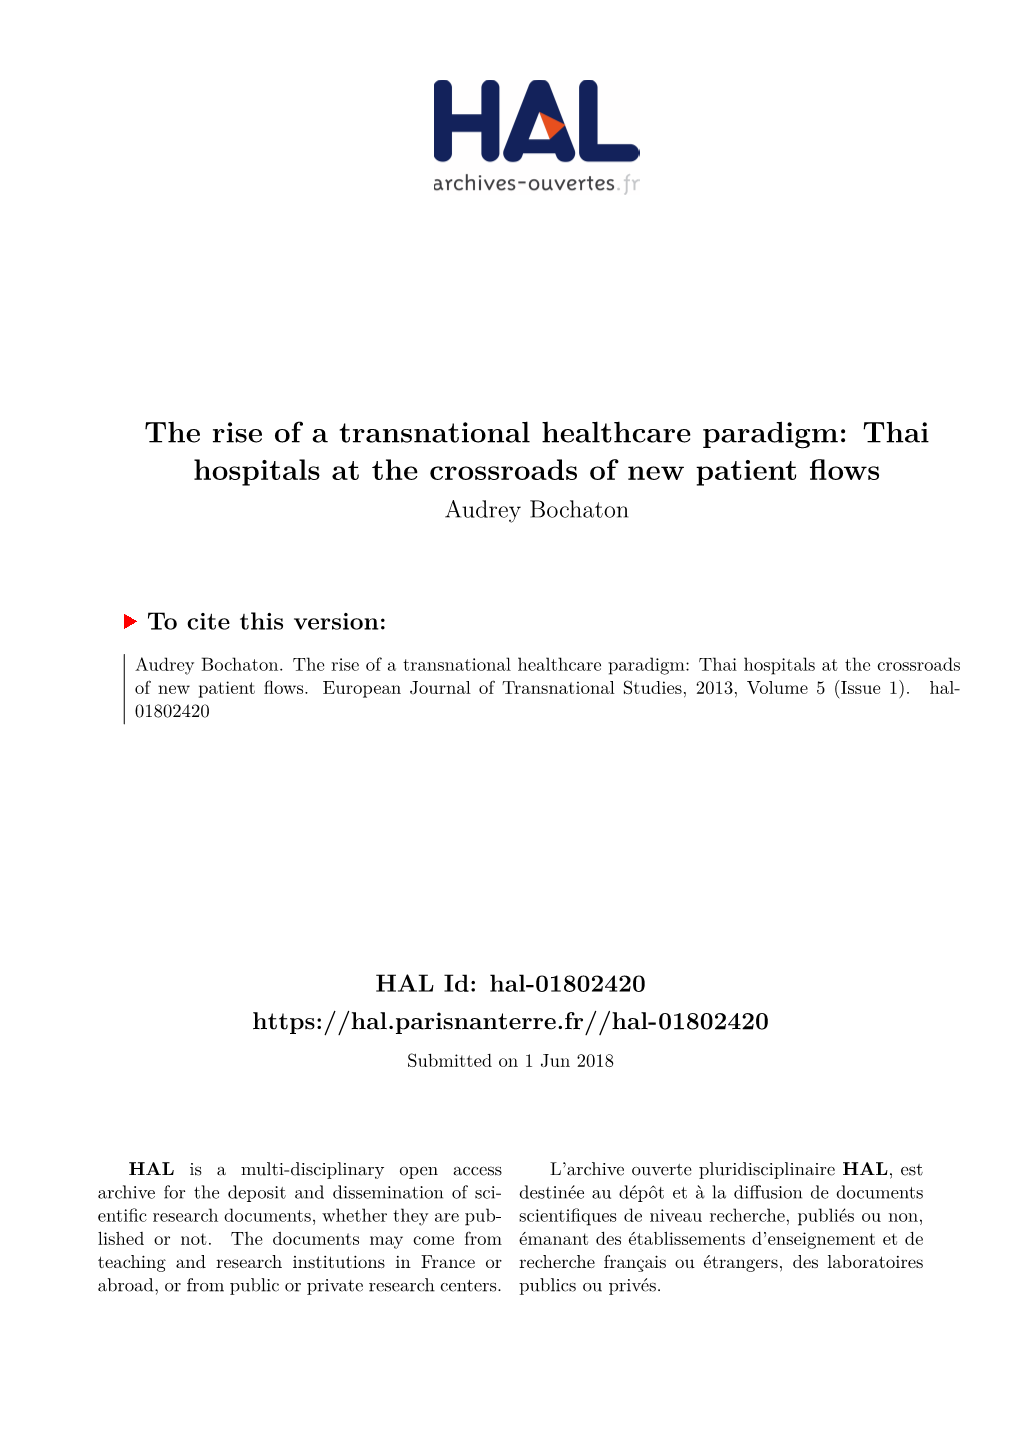 The Rise of a Transnational Healthcare Paradigm: Thai Hospitals at the Crossroads of New Patient Flows Audrey Bochaton